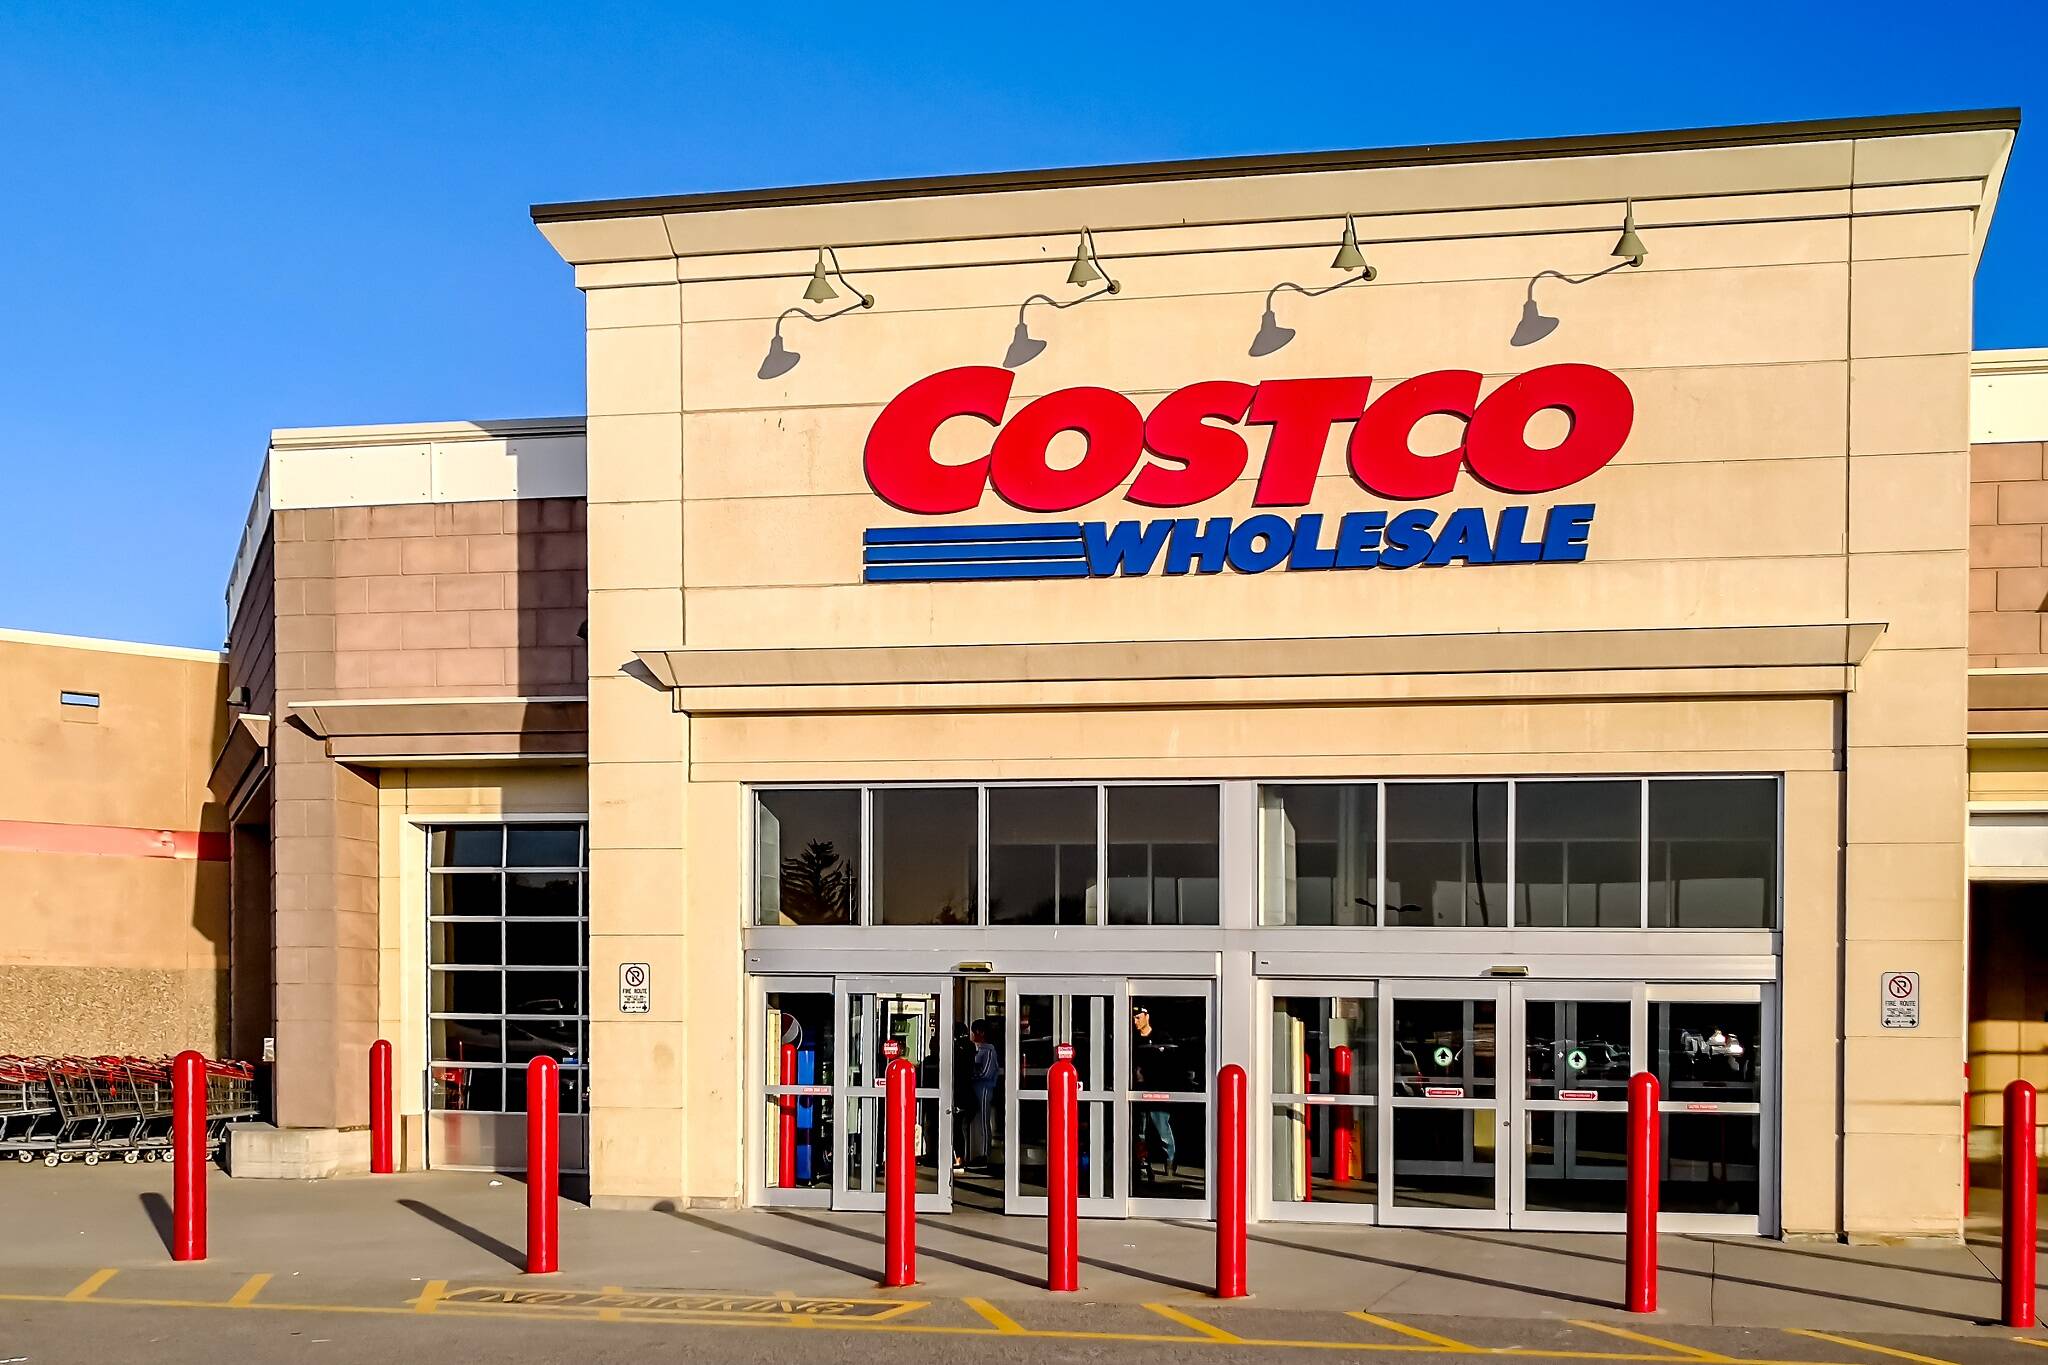 Costco Canada executive claims company has cut prices on 'hundreds